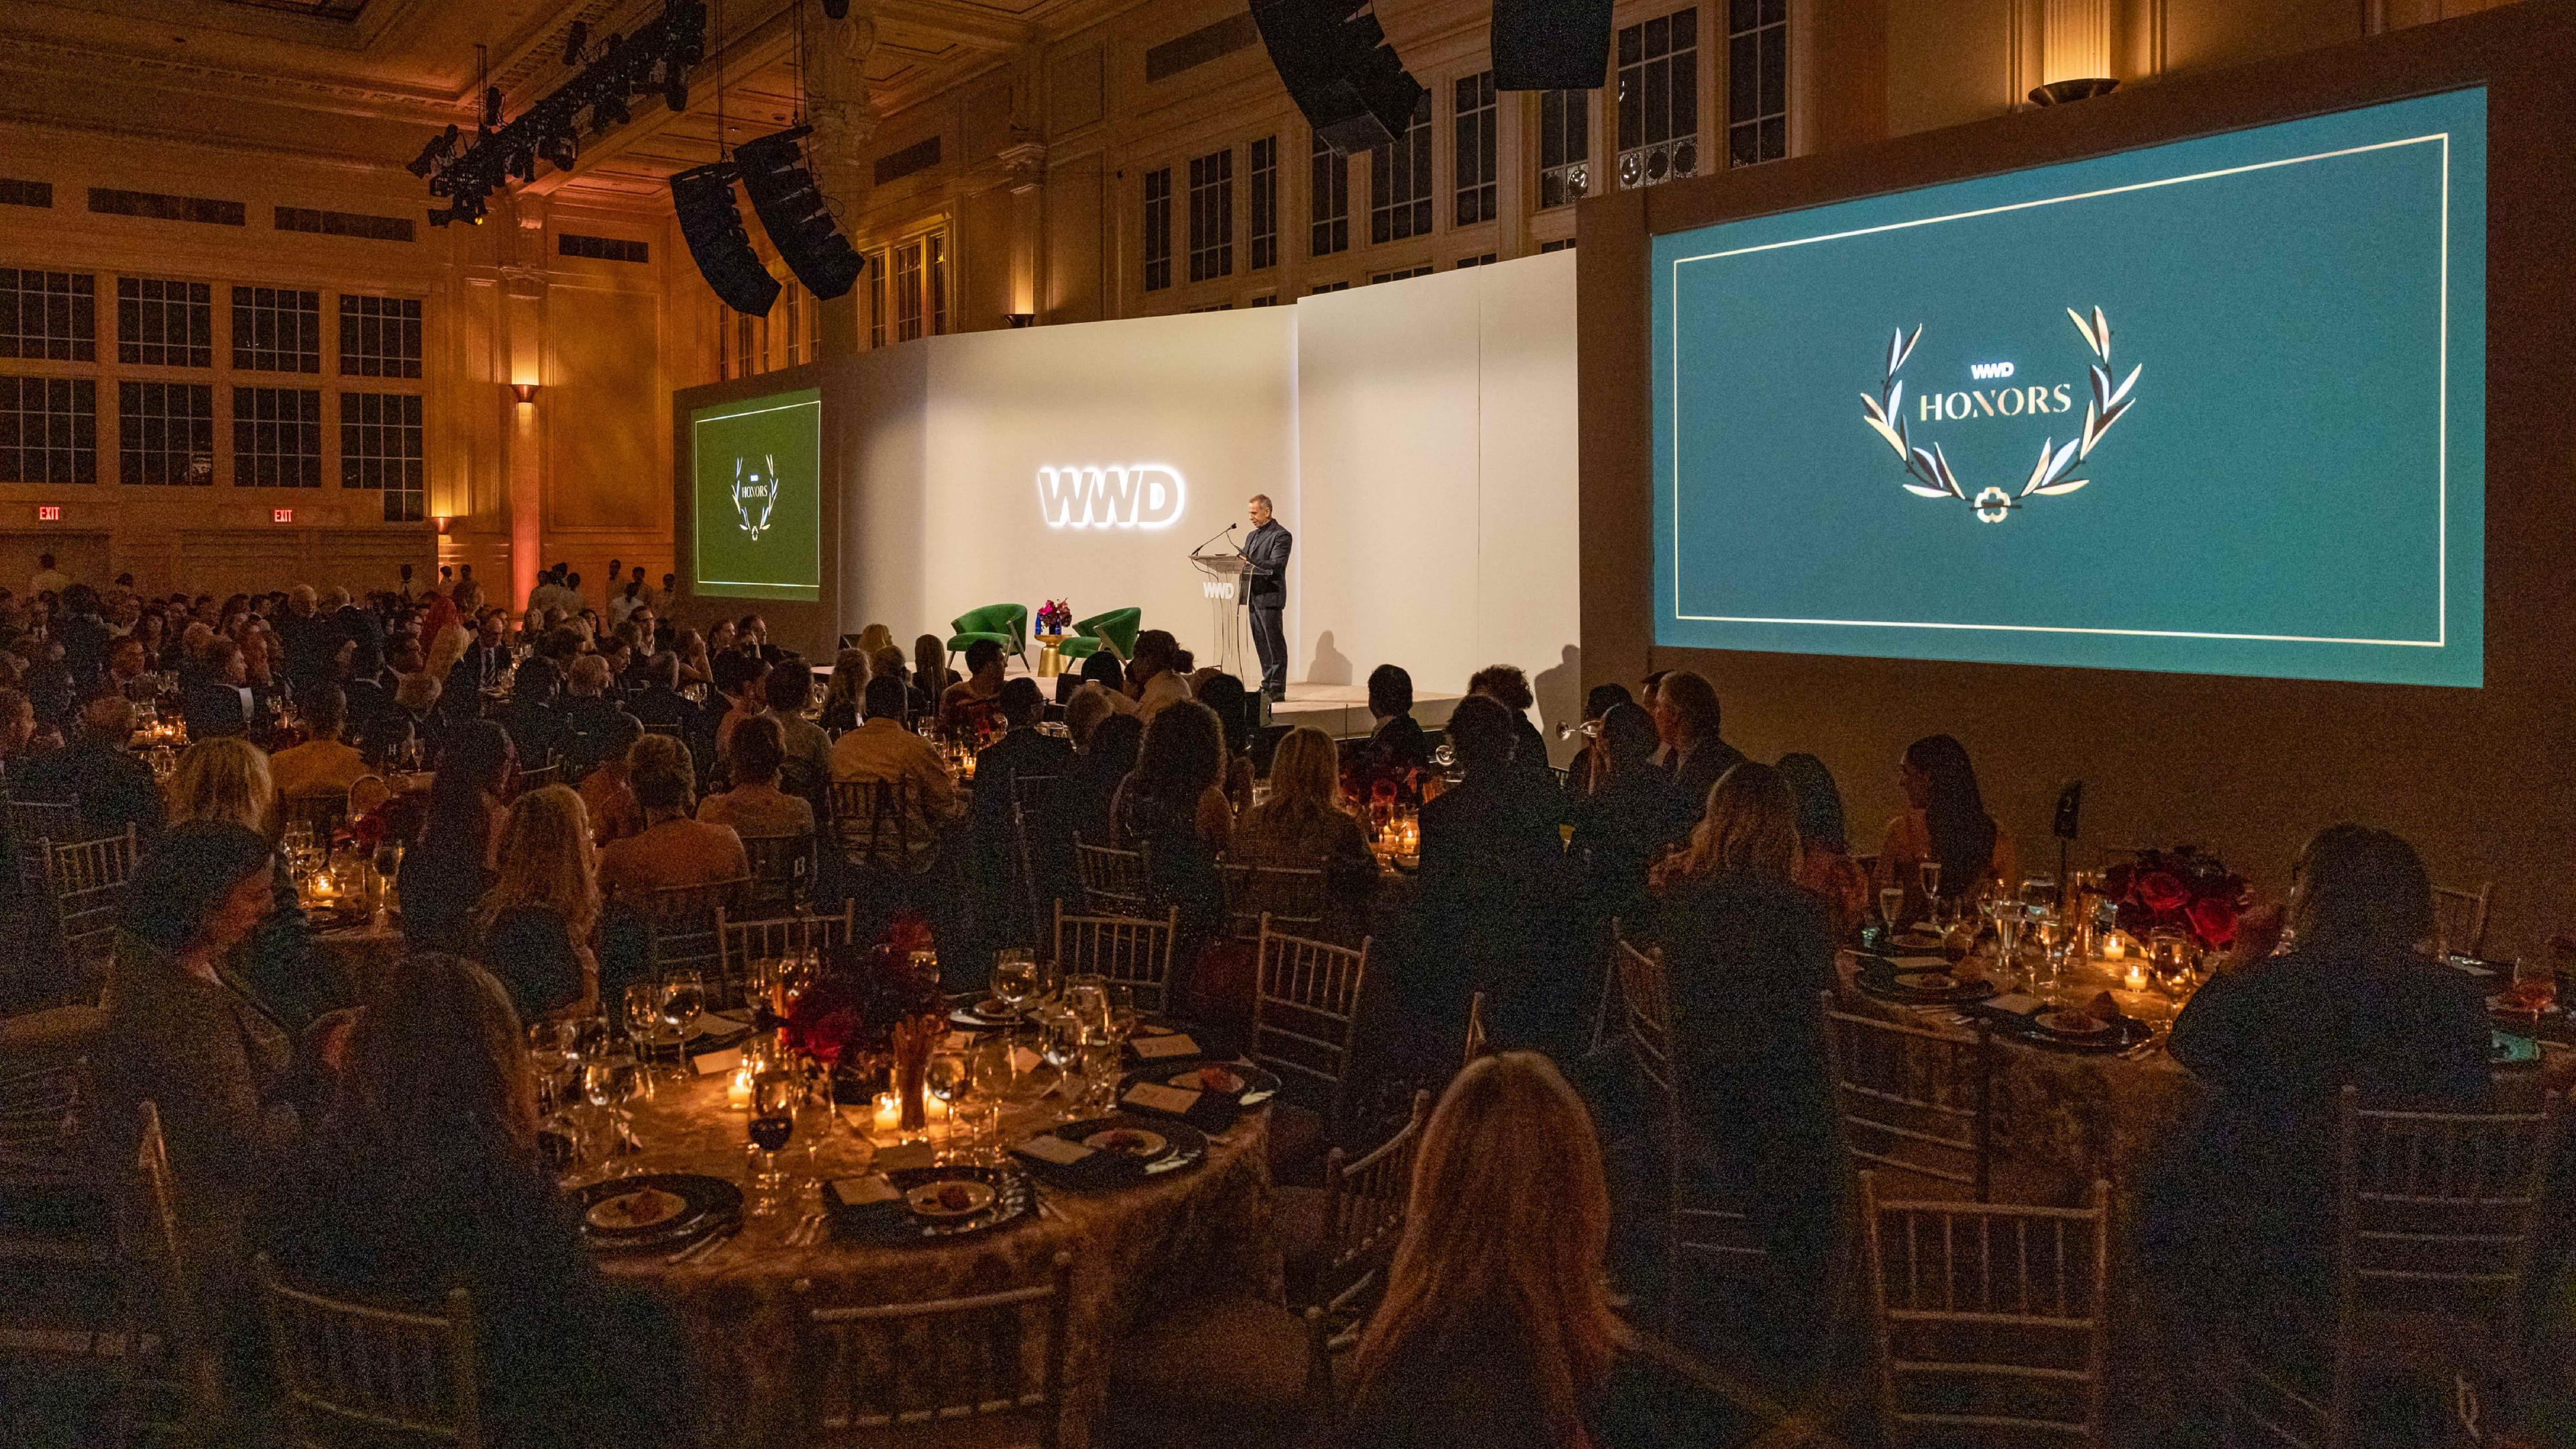 The main ceremony hall at WWD Honors with the branding on the large screens